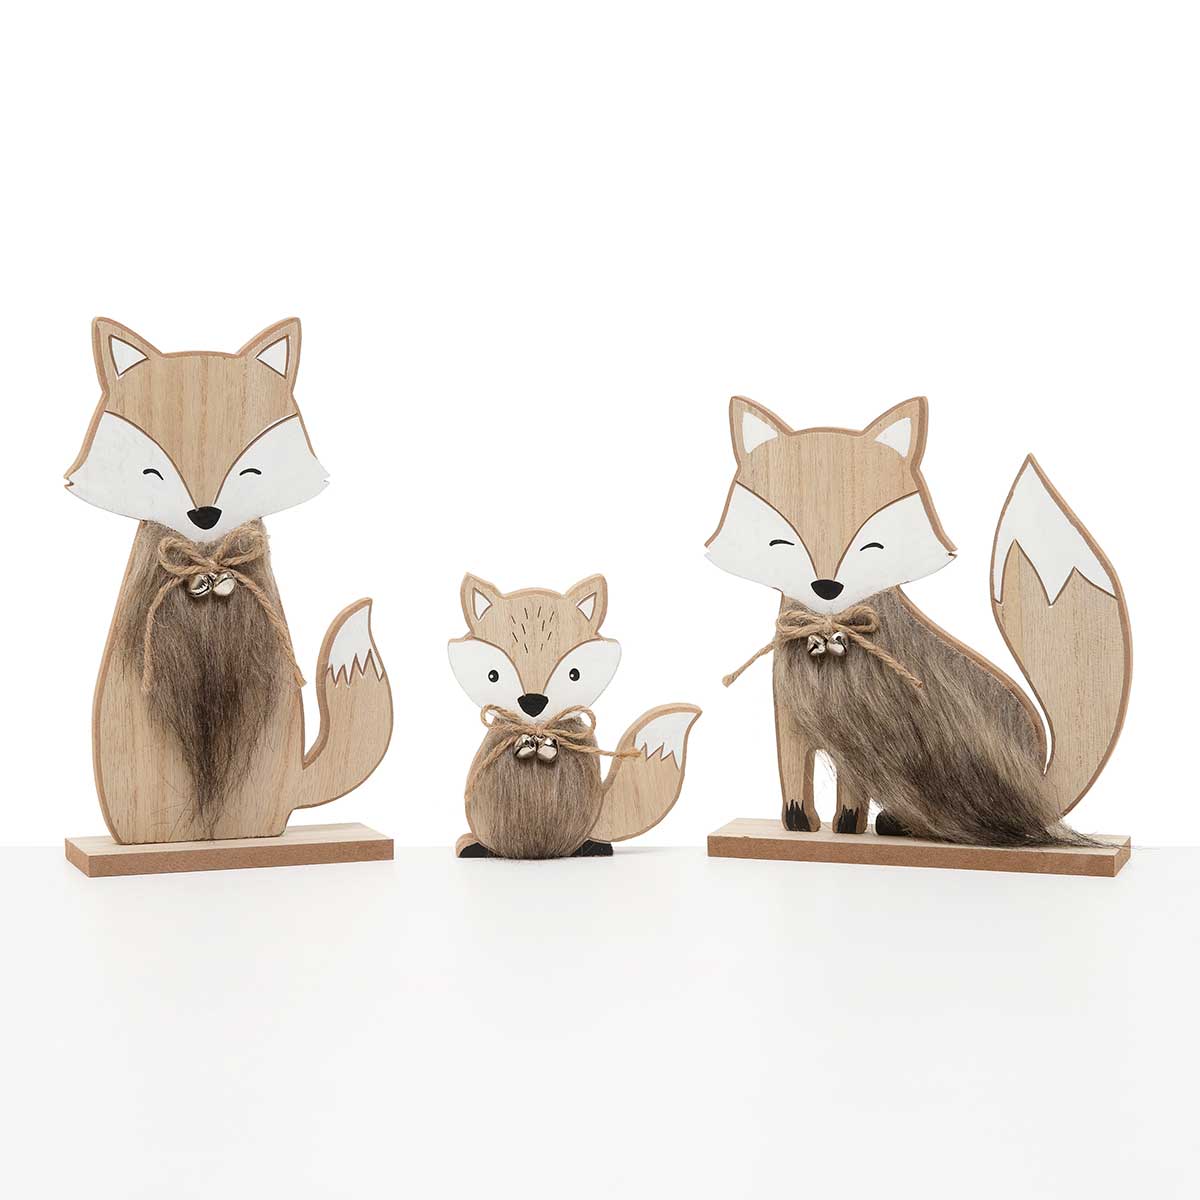 SIT-A-BOUT FOX WITH LEGS 7.25IN X 2IN X 7.75IN - Click Image to Close